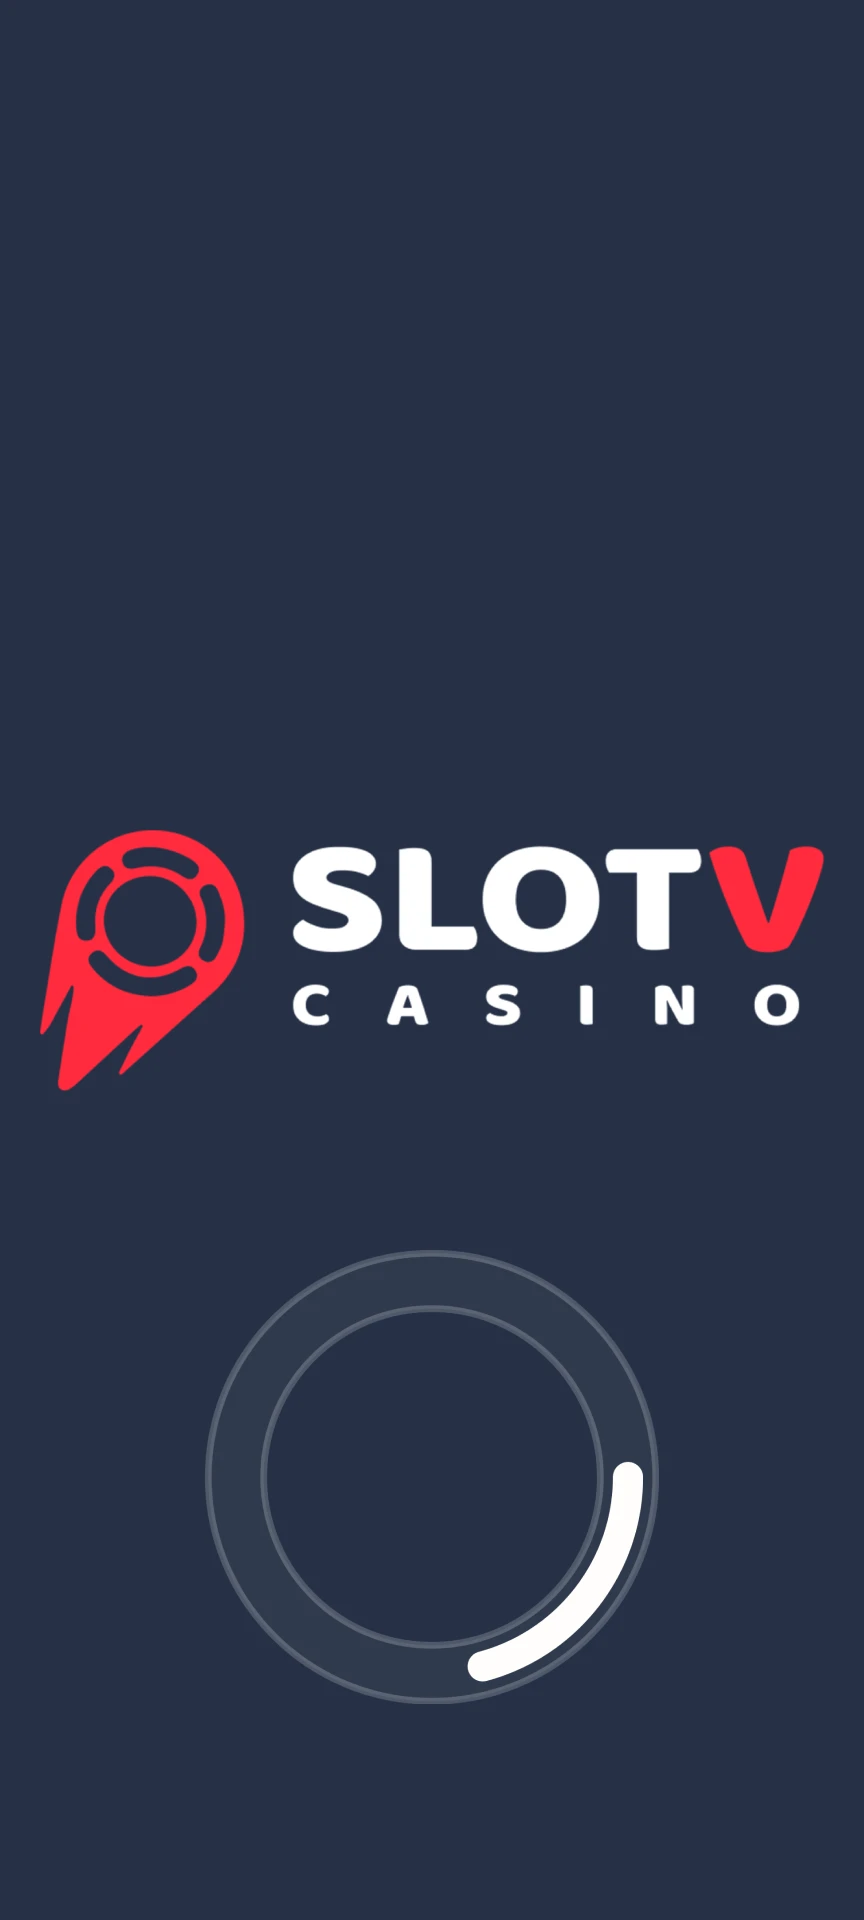 Download the SlotV app for Android.